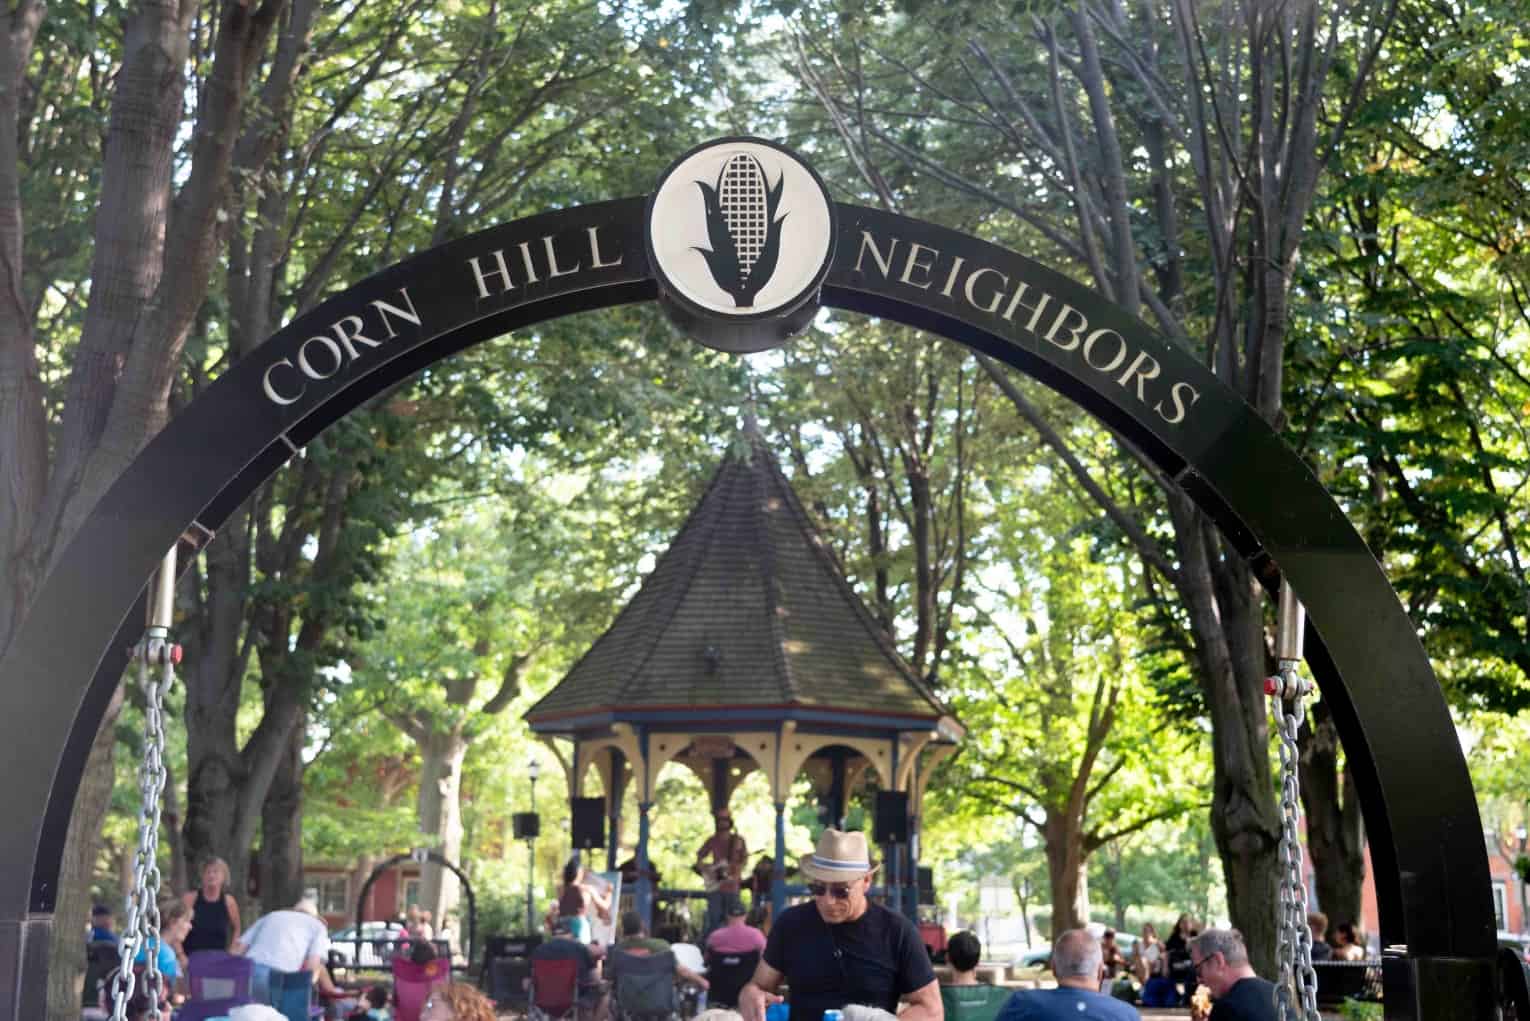 2022 Corn Hill Gazebo Concert Series head to the root 46